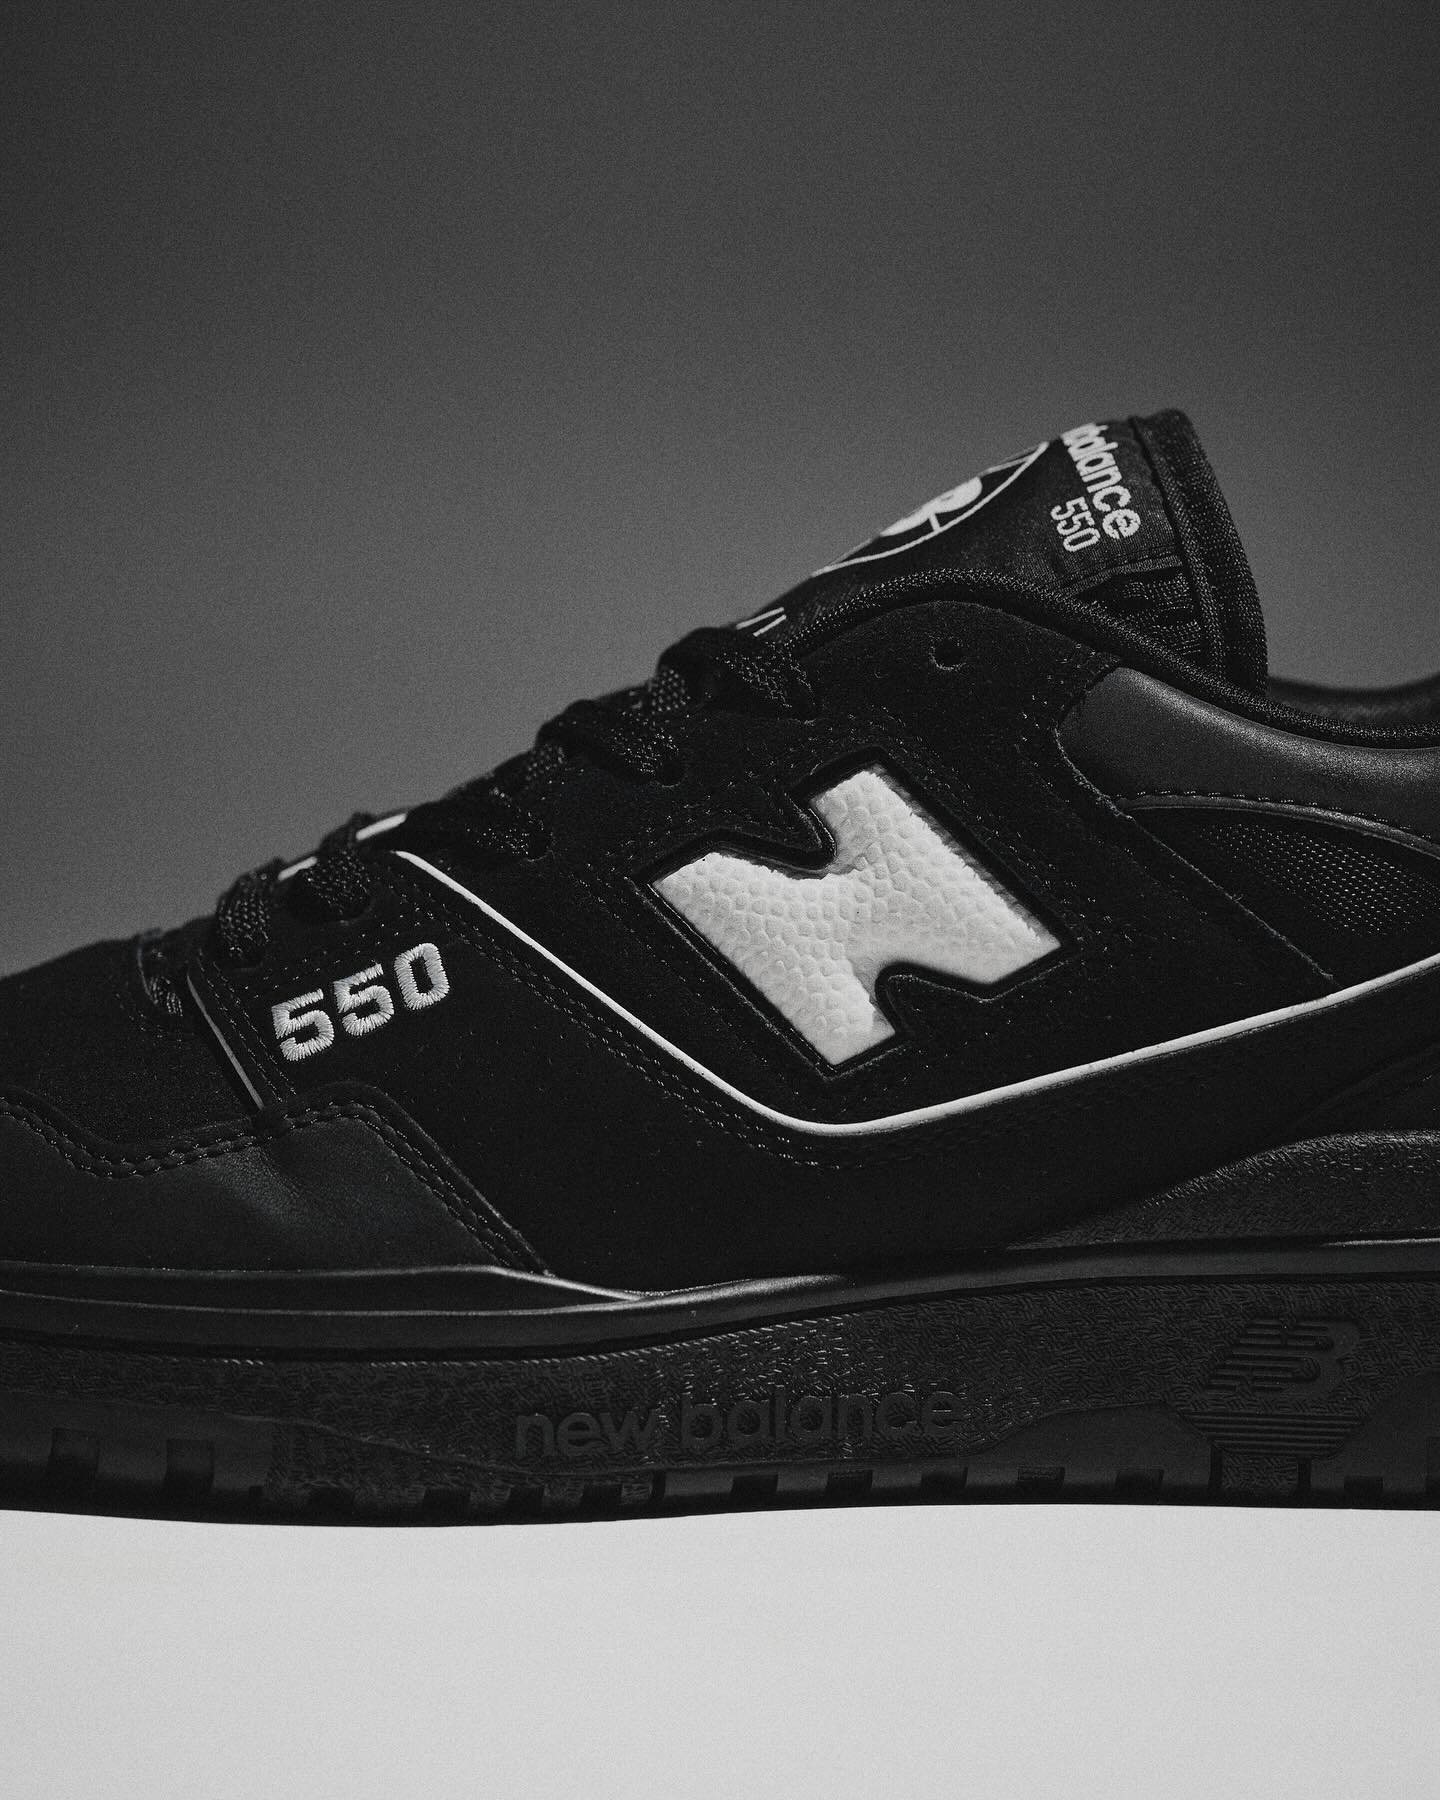 atmos' New Balance 550 “Back in Black” Wears a Tux